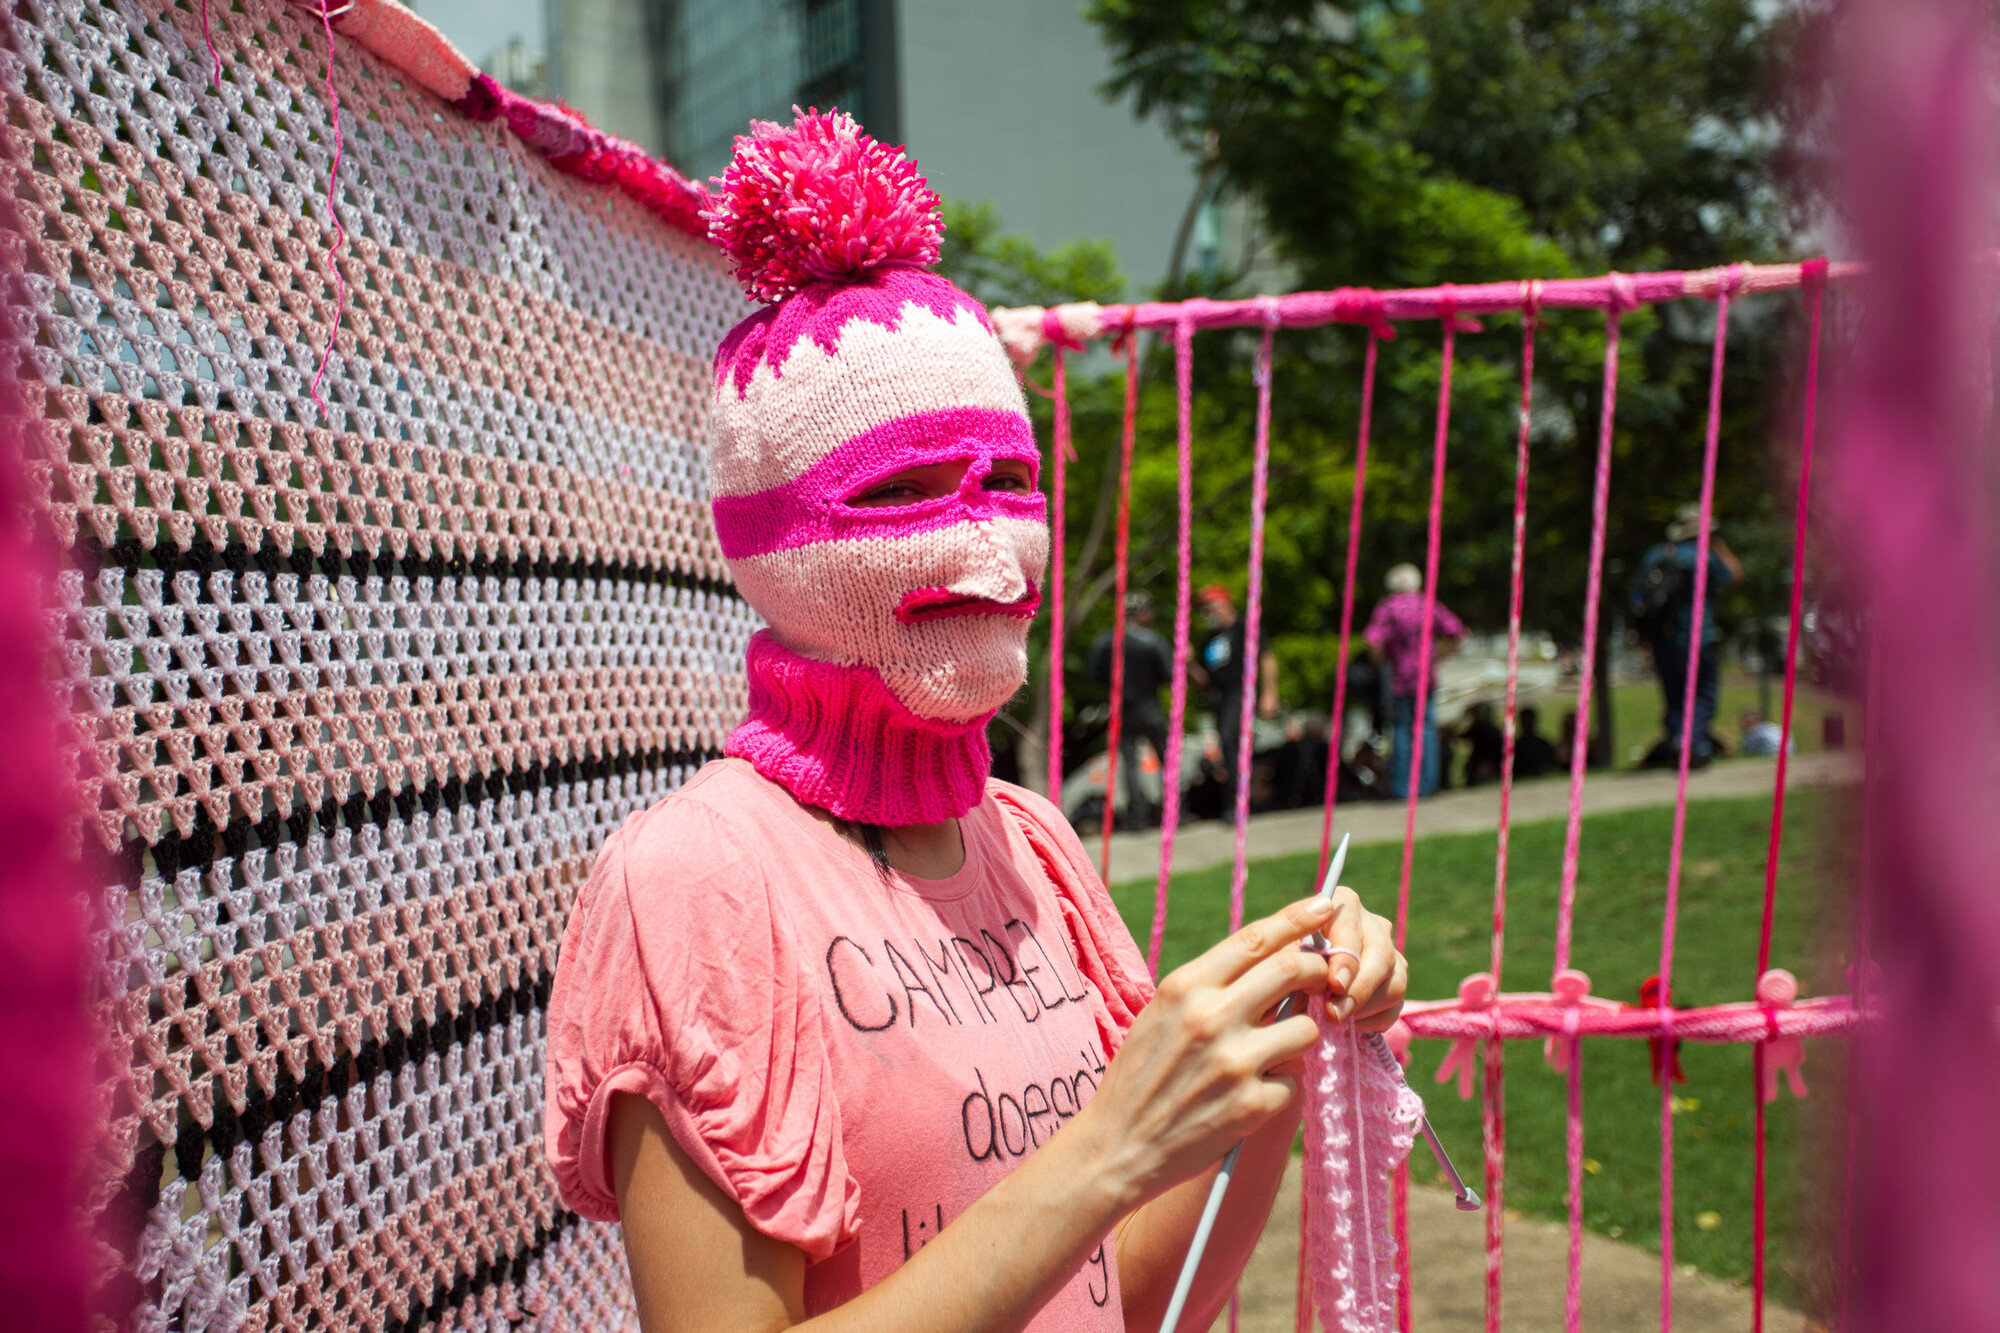 performer with pink hat covering their face, knitting, and surrounded by yarn.